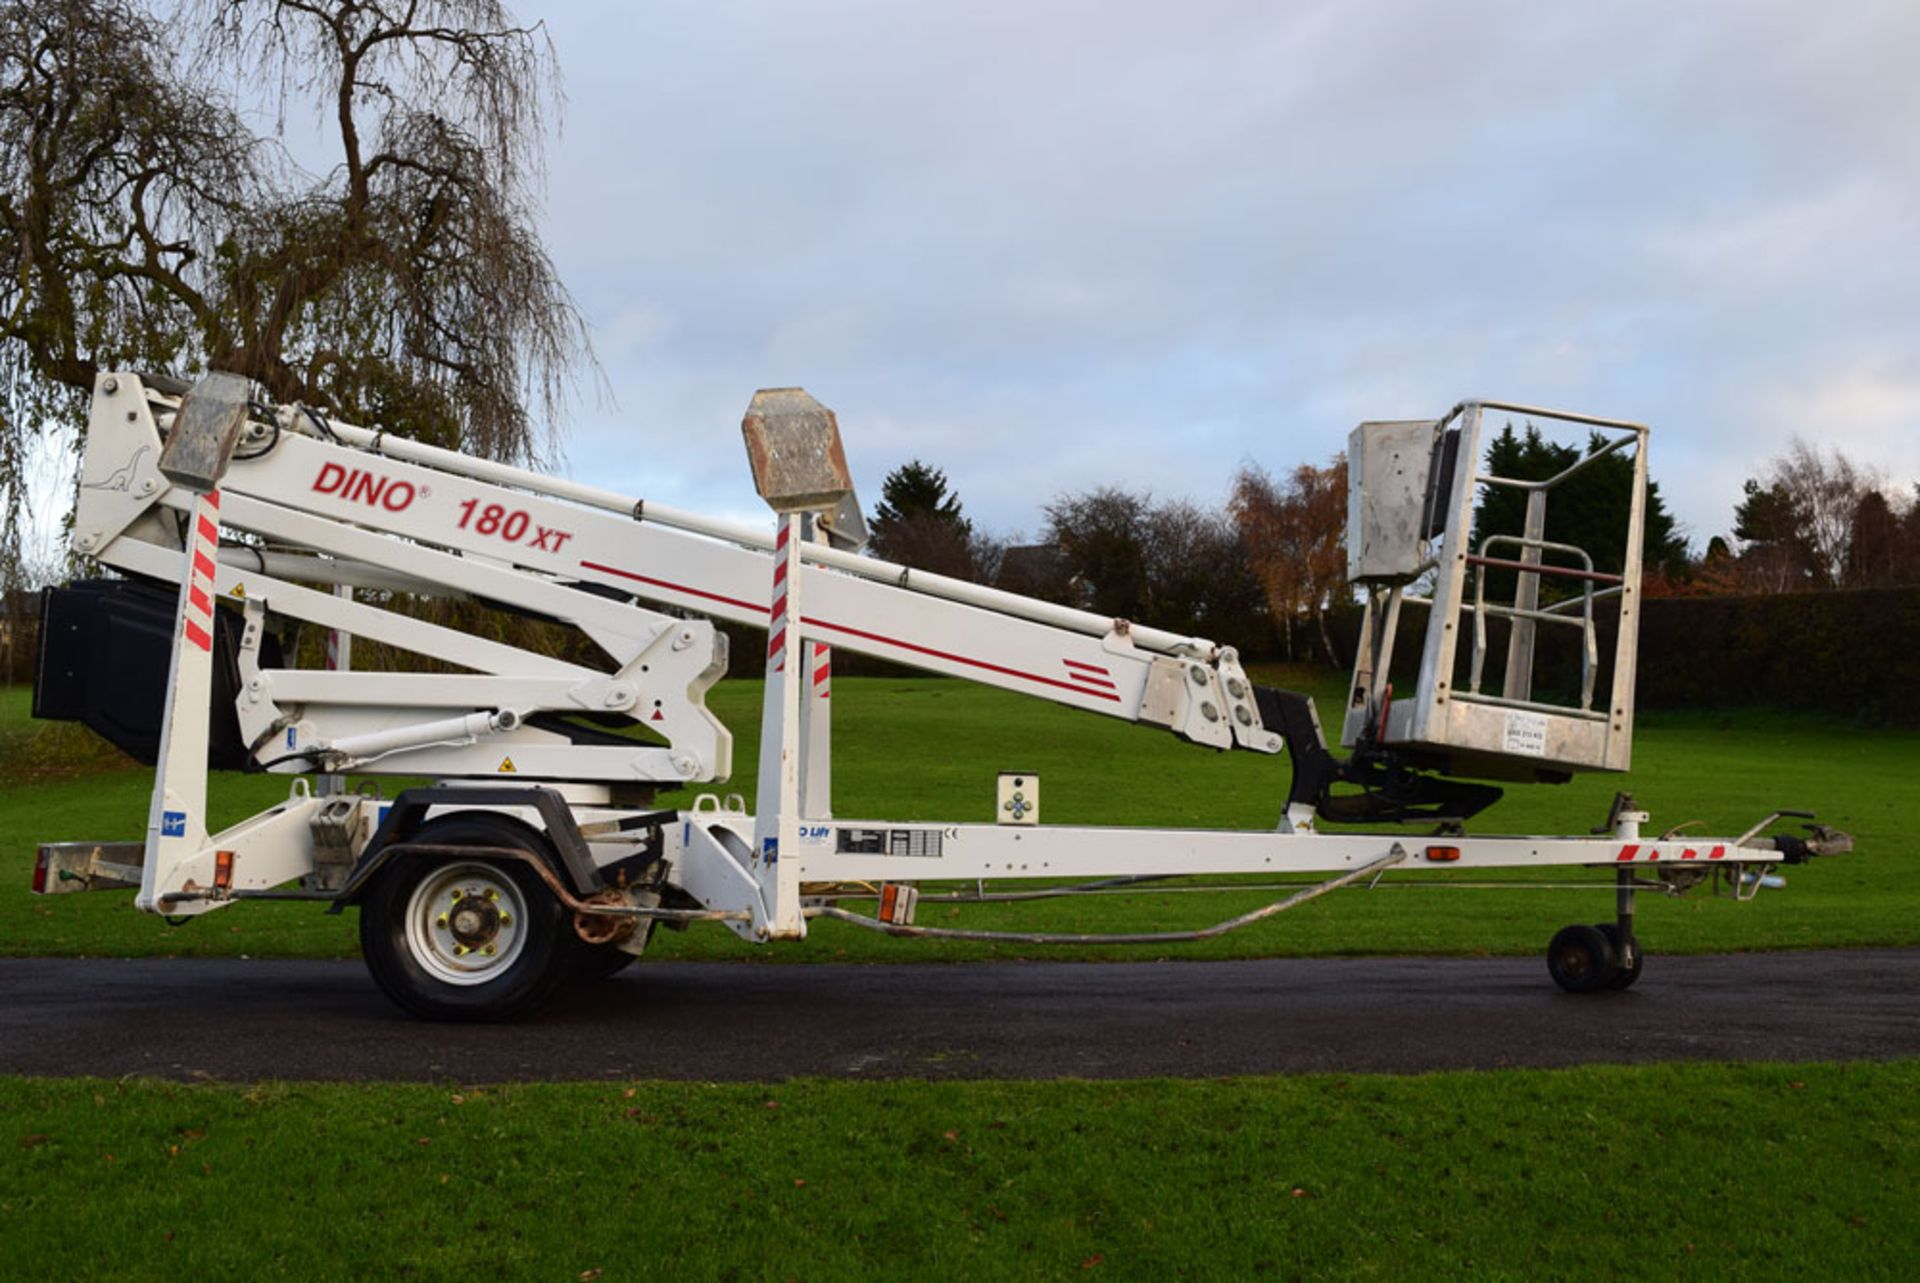 2002 Dino 180XT Trailer Mounted 18 Meter Access Lift - Image 3 of 3